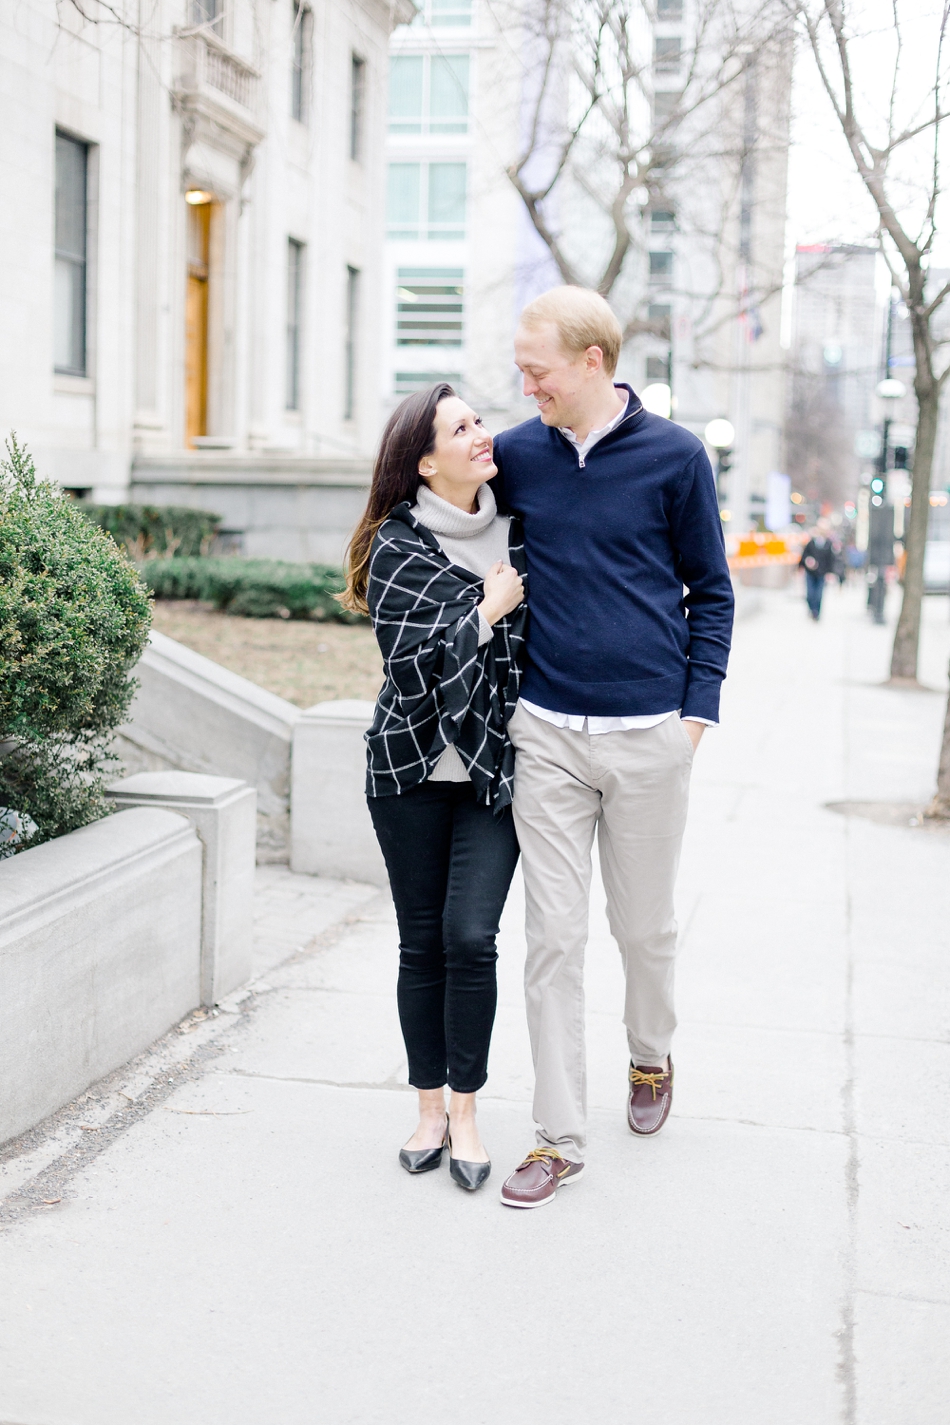 Stephanie-and-Rick-Montreal-Downtown-Engagement-Session-Lisa-Renault-Photographie-Photographe-Mariage-Montreal_0022.jpg